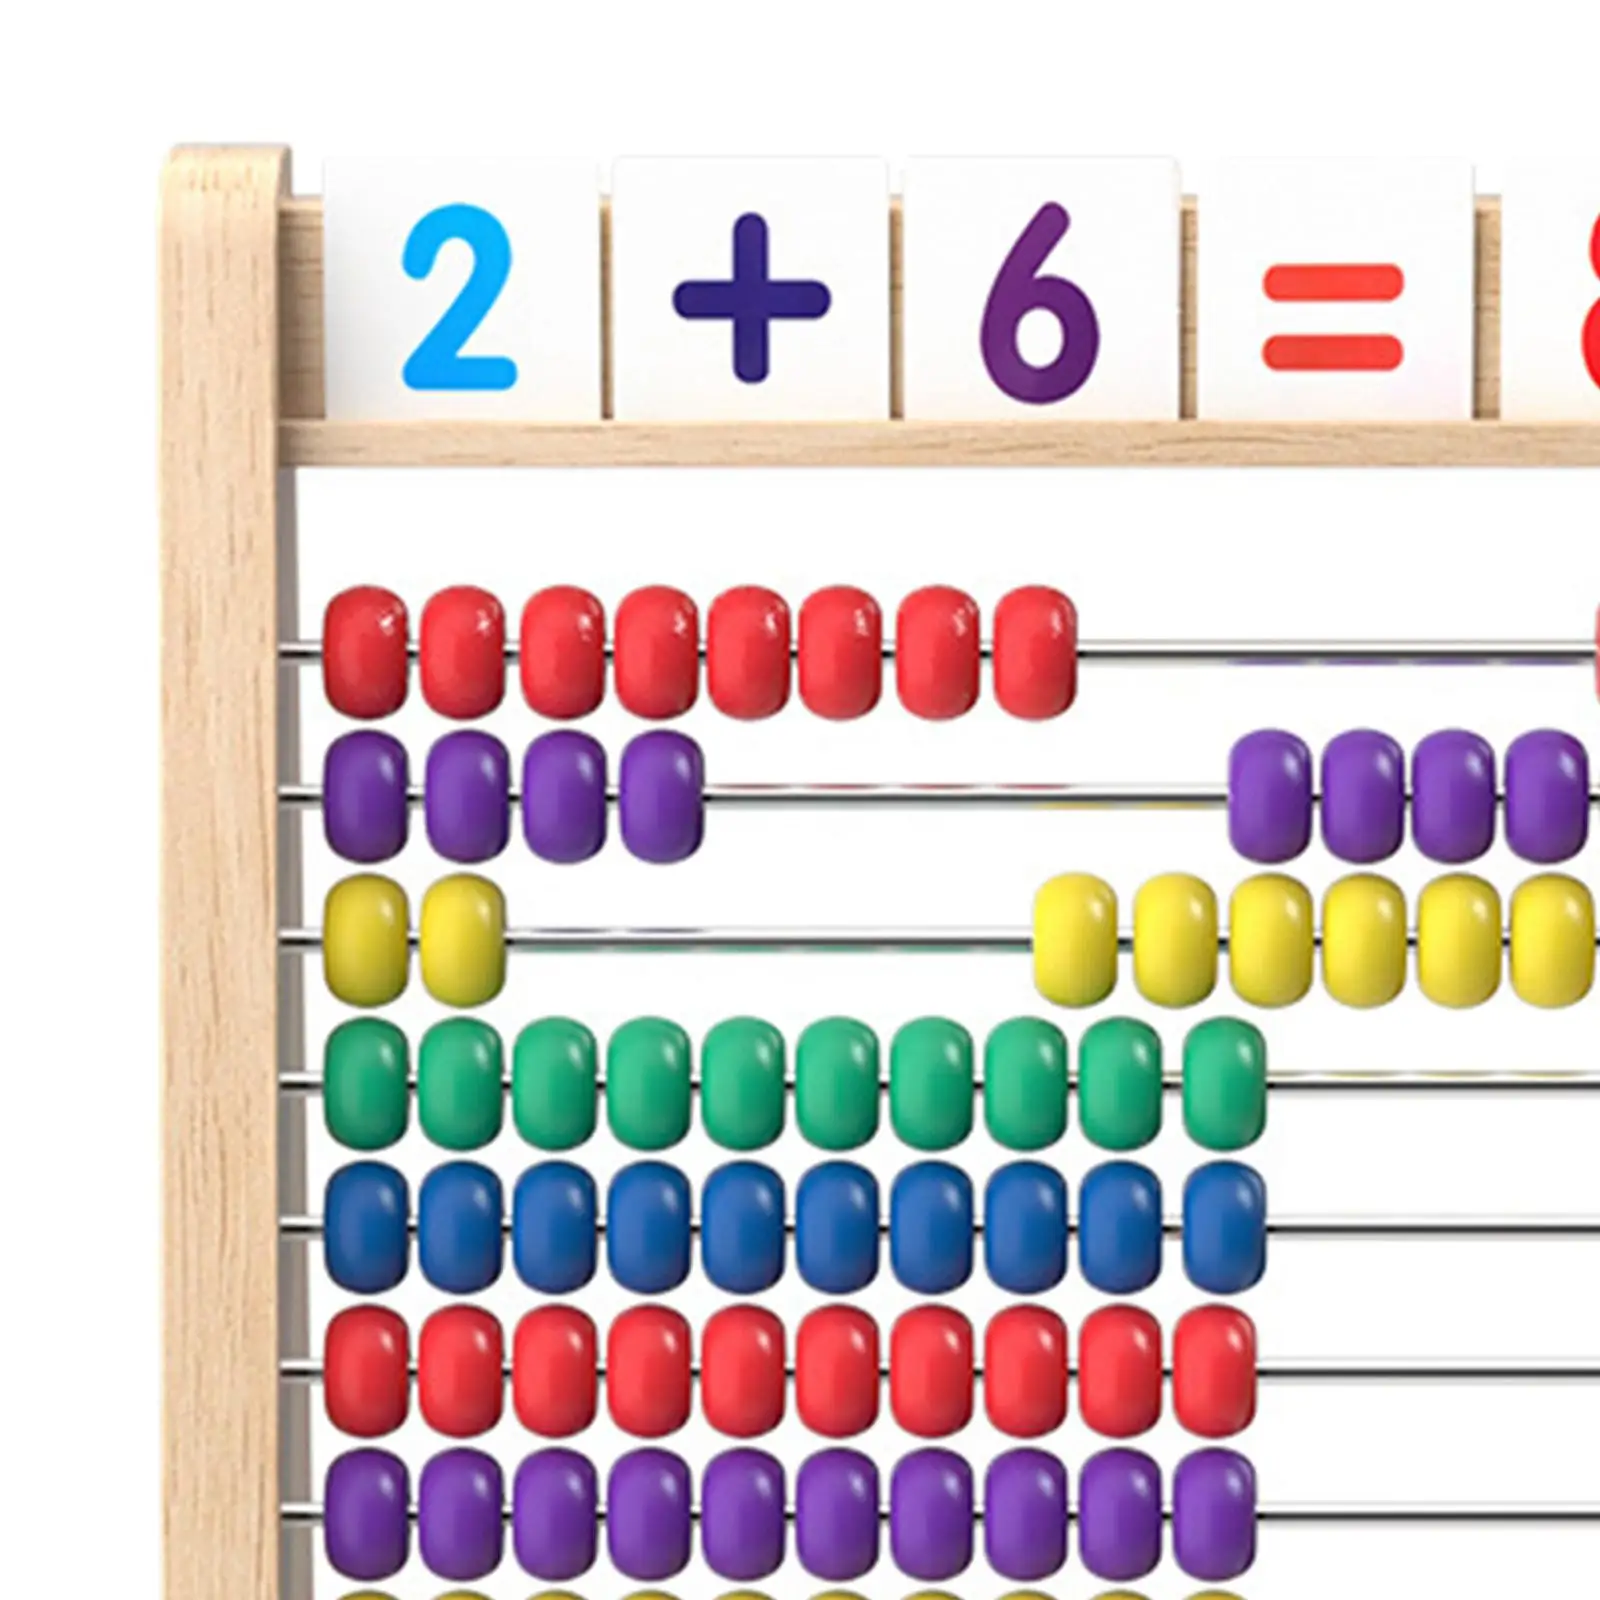 Wooden Frame Abacus Addition Subtraction Formula Table Learning Education Toy for Early Childhood Education Preschool Learning